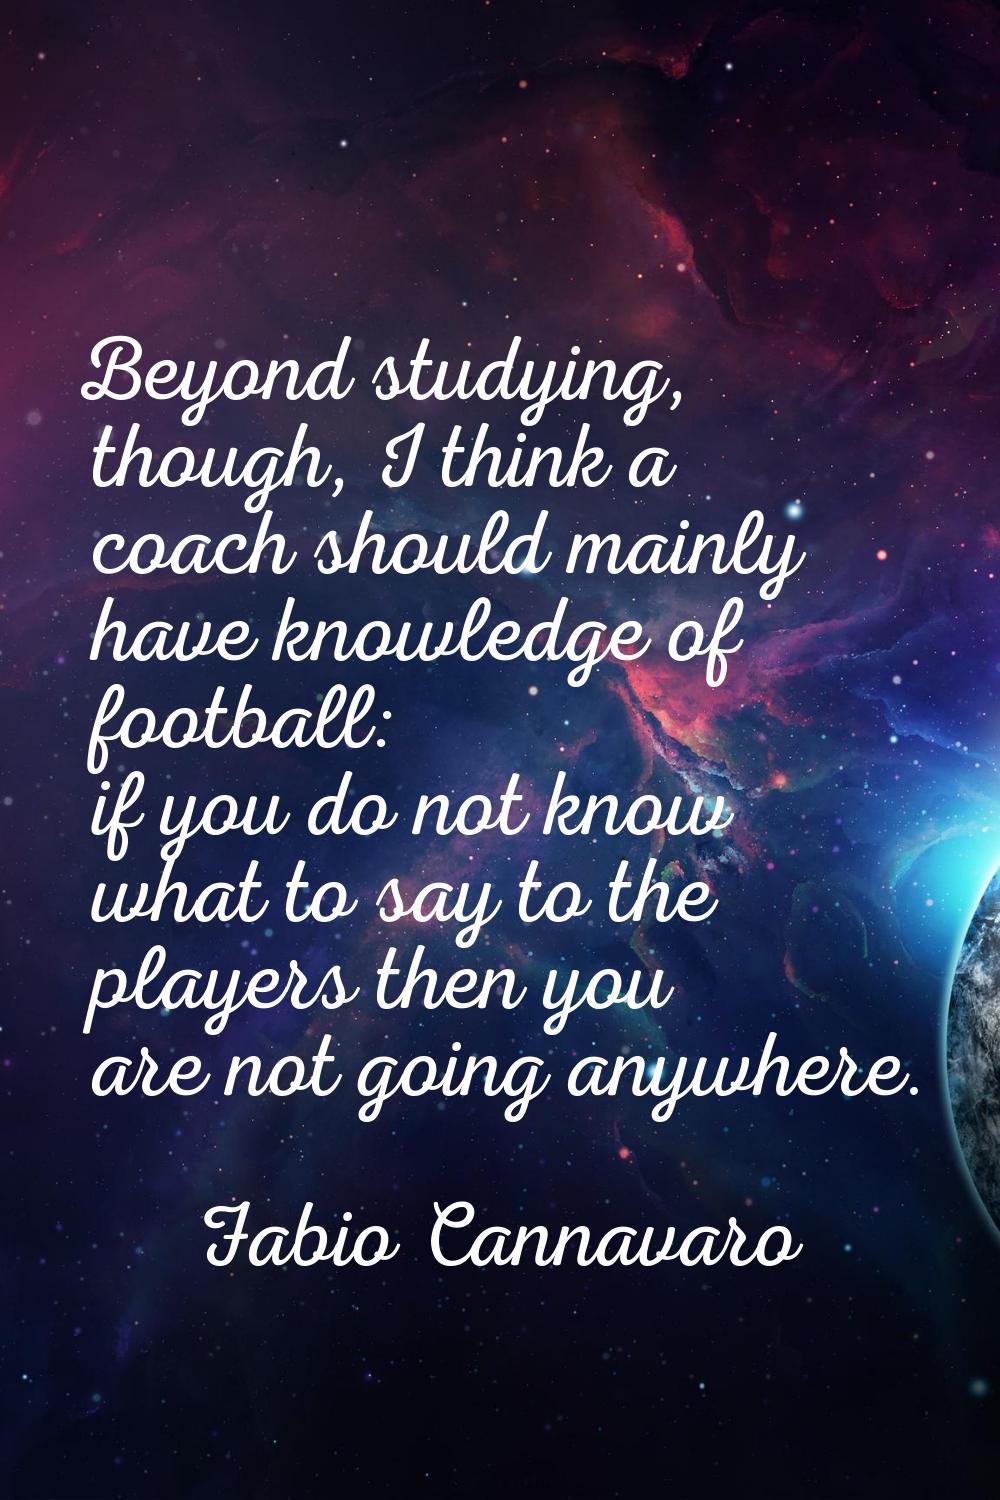 Beyond studying, though, I think a coach should mainly have knowledge of football: if you do not kn